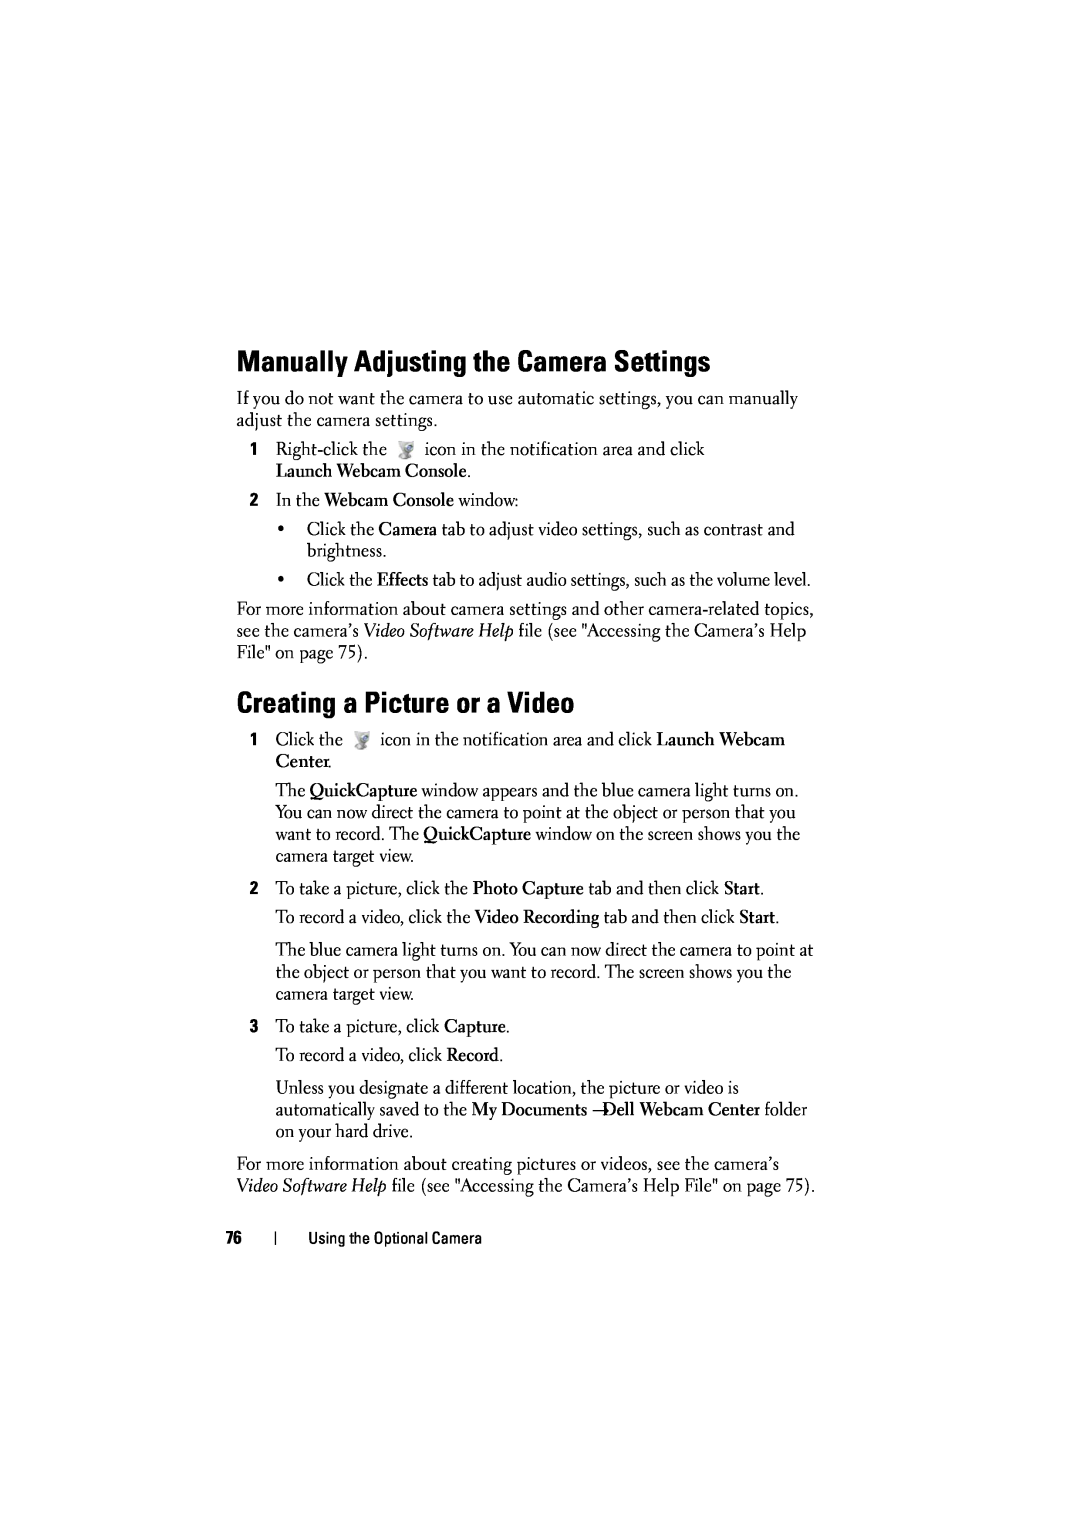 Dell 1525, 1526 owner manual Manually Adjusting the Camera Settings, Creating a Picture or a Video 